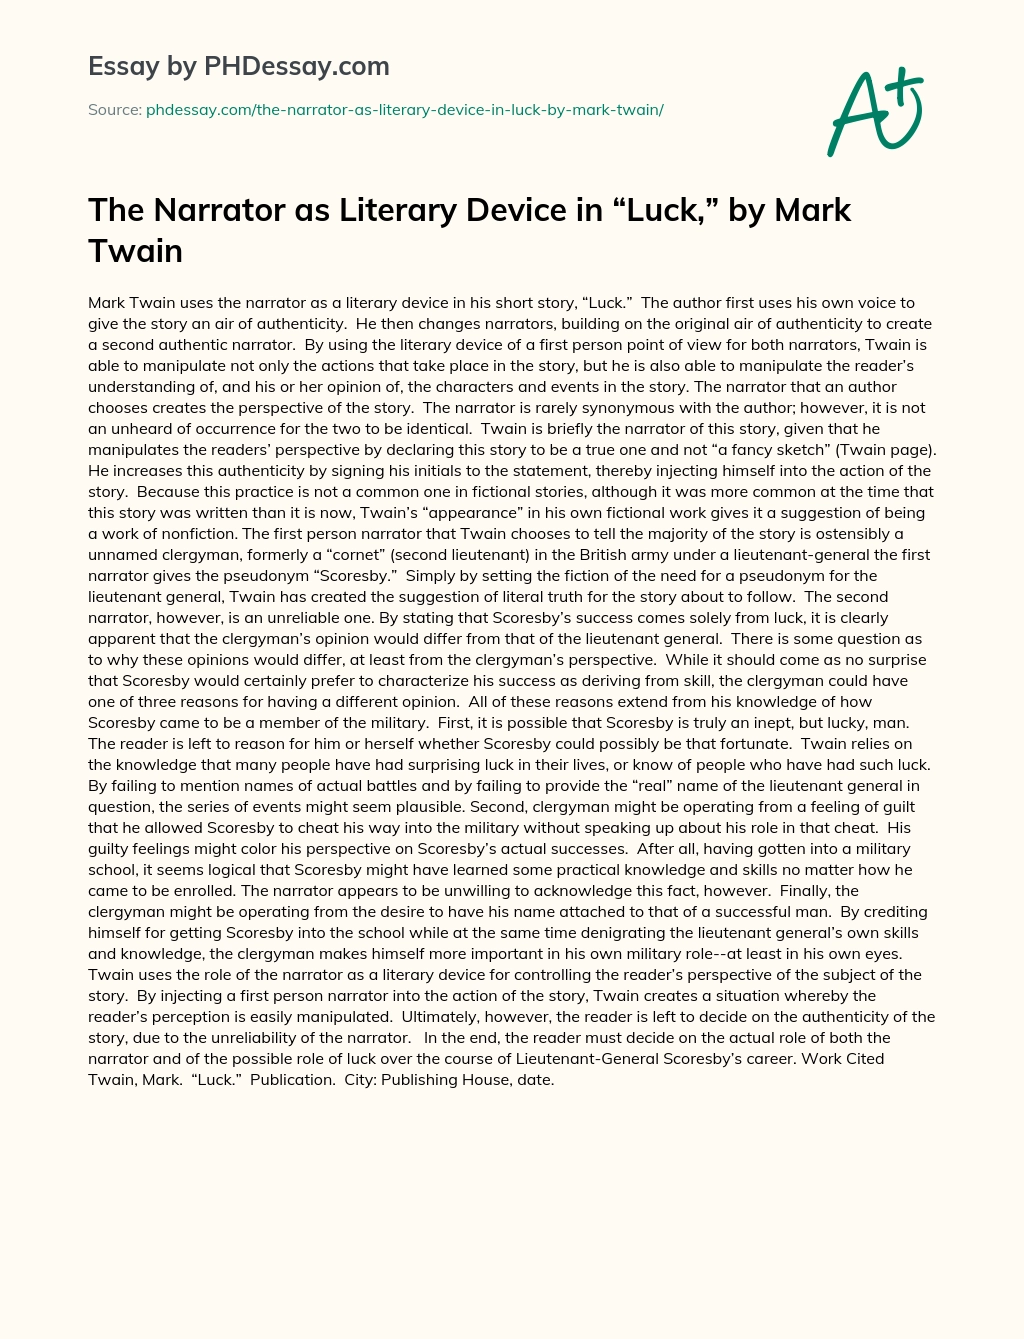 The Narrator as Literary Device in “Luck,” by Mark Twain essay